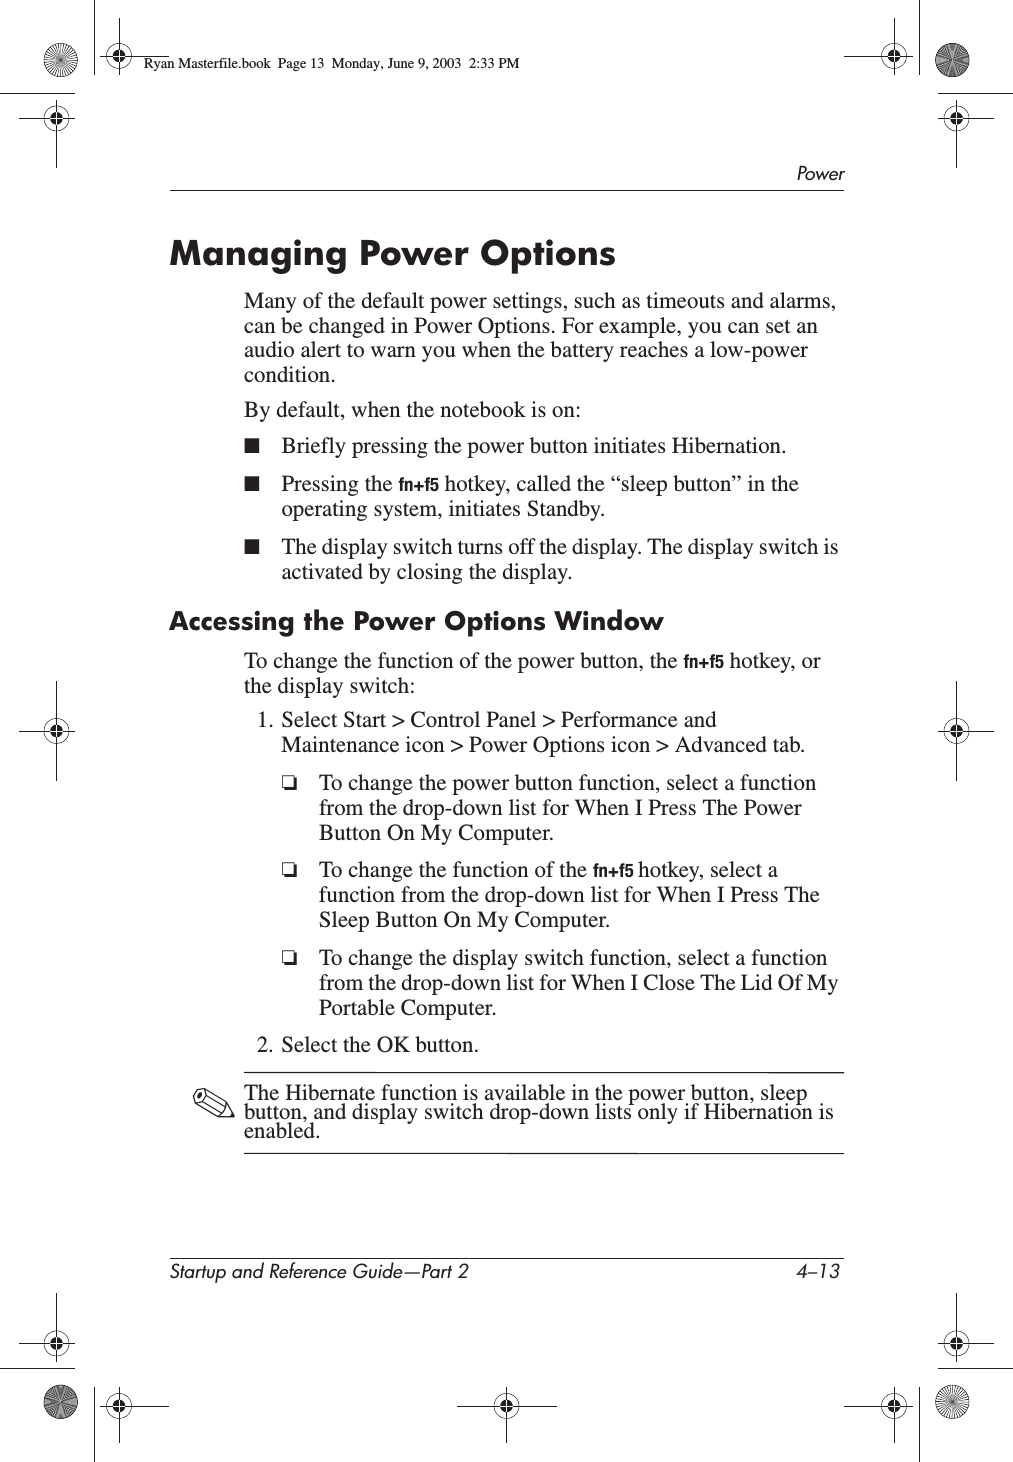 PowerStartup and Reference Guide—Part 2 4–13Managing Power OptionsMany of the default power settings, such as timeouts and alarms, can be changed in Power Options. For example, you can set an audio alert to warn you when the battery reaches a low-power condition.By default, when the notebook is on:■Briefly pressing the power button initiates Hibernation.■Pressing the fn+f5 hotkey, called the “sleep button” in the operating system, initiates Standby. ■The display switch turns off the display. The display switch is activated by closing the display. Accessing the Power Options WindowTo change the function of the power button, the fn+f5 hotkey, or the display switch:1. Select Start &gt; Control Panel &gt; Performance and Maintenance icon &gt; Power Options icon &gt; Advanced tab.❏To change the power button function, select a function from the drop-down list for When I Press The Power Button On My Computer.❏To change the function of the fn+f5 hotkey, select a function from the drop-down list for When I Press The Sleep Button On My Computer.❏To change the display switch function, select a function from the drop-down list for When I Close The Lid Of My Portable Computer.2. Select the OK button.✎The Hibernate function is available in the power button, sleep button, and display switch drop-down lists only if Hibernation is enabled.Ryan Masterfile.book  Page 13  Monday, June 9, 2003  2:33 PM